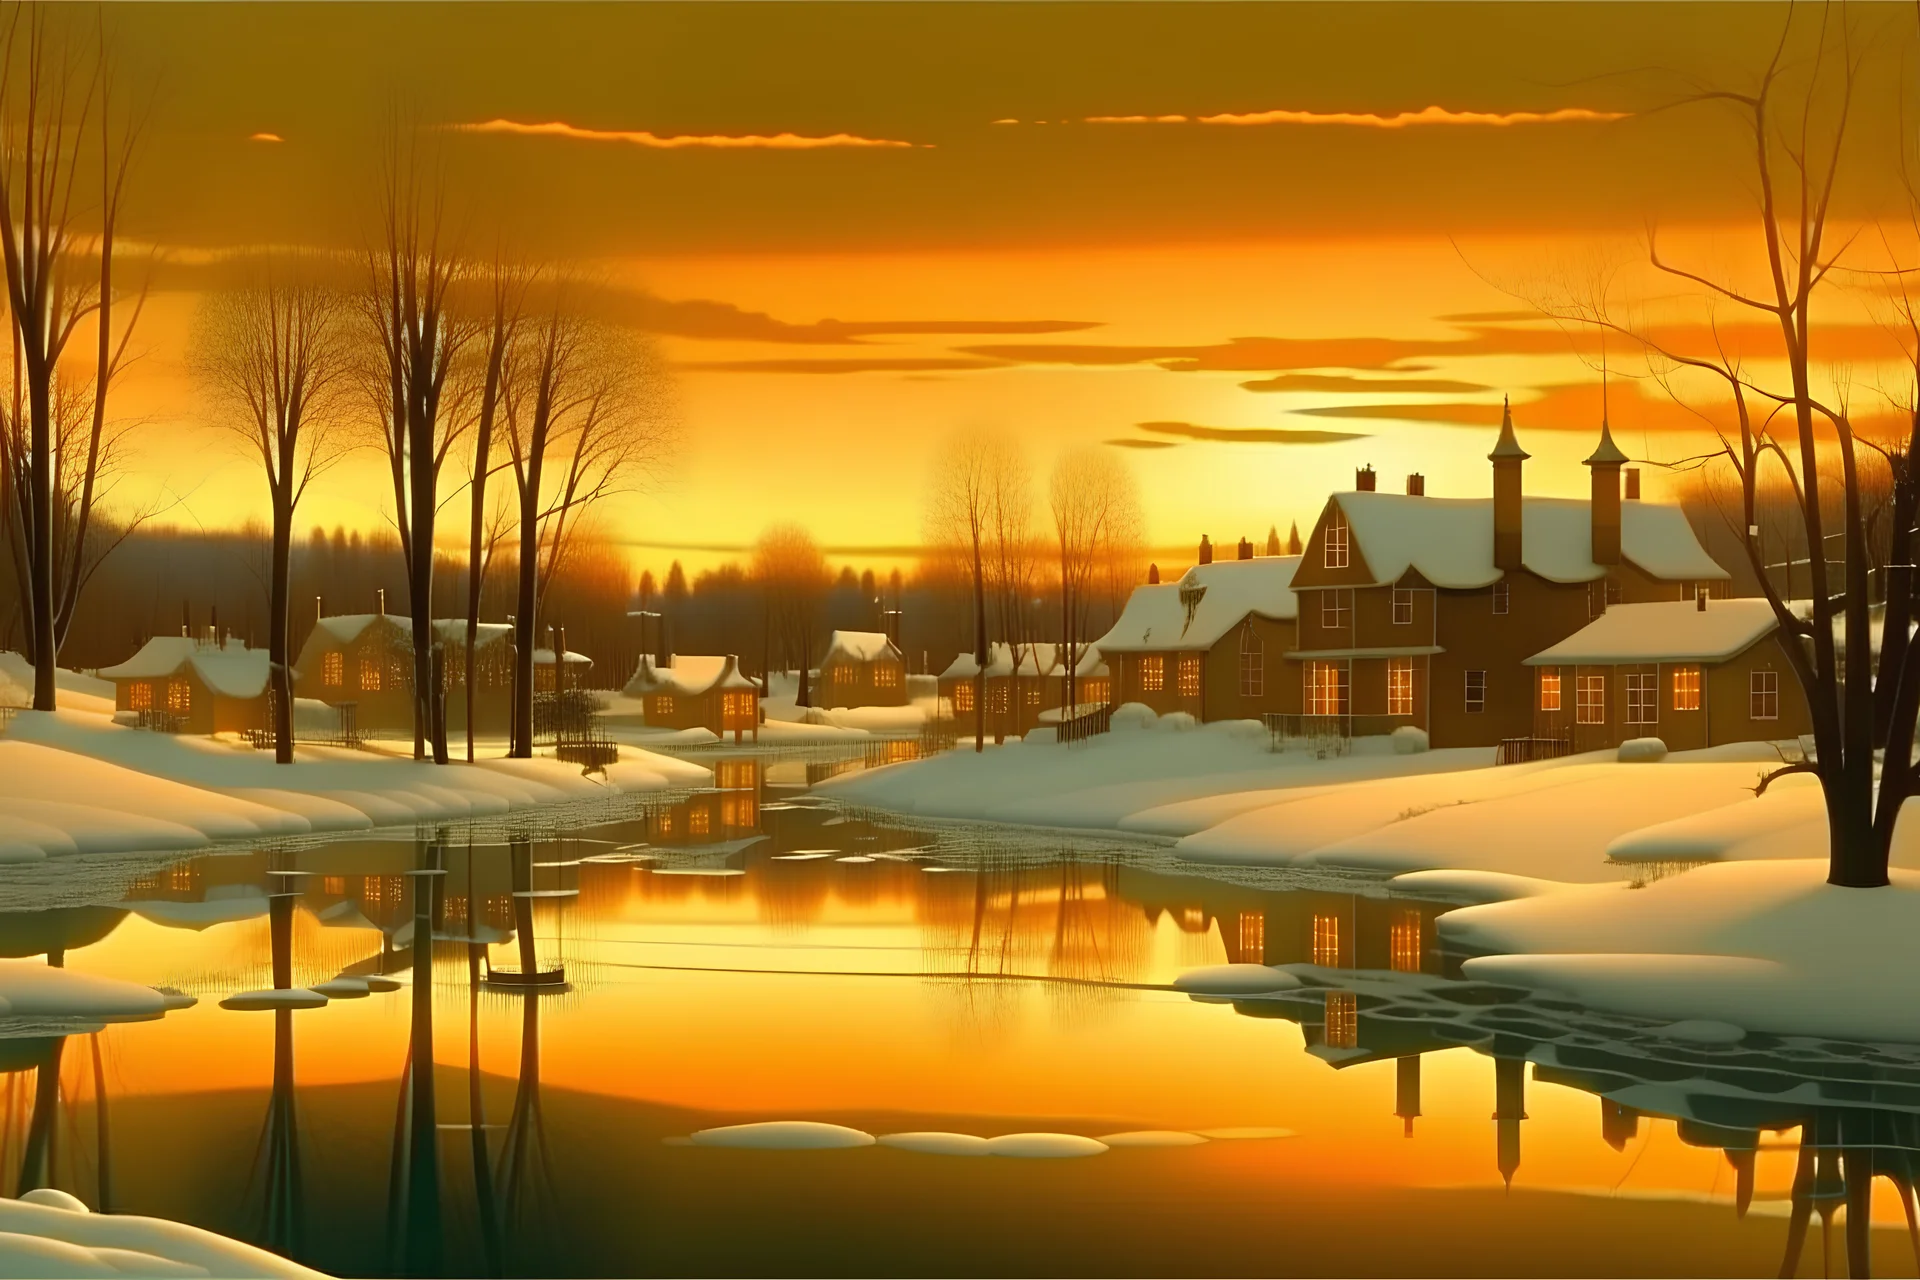 Landscape , winter, lit village, sunrise, lake, snow, bright, cottonwood trees, old buildings, reflections, w , high detail,4k, in style of Henri Rousseau